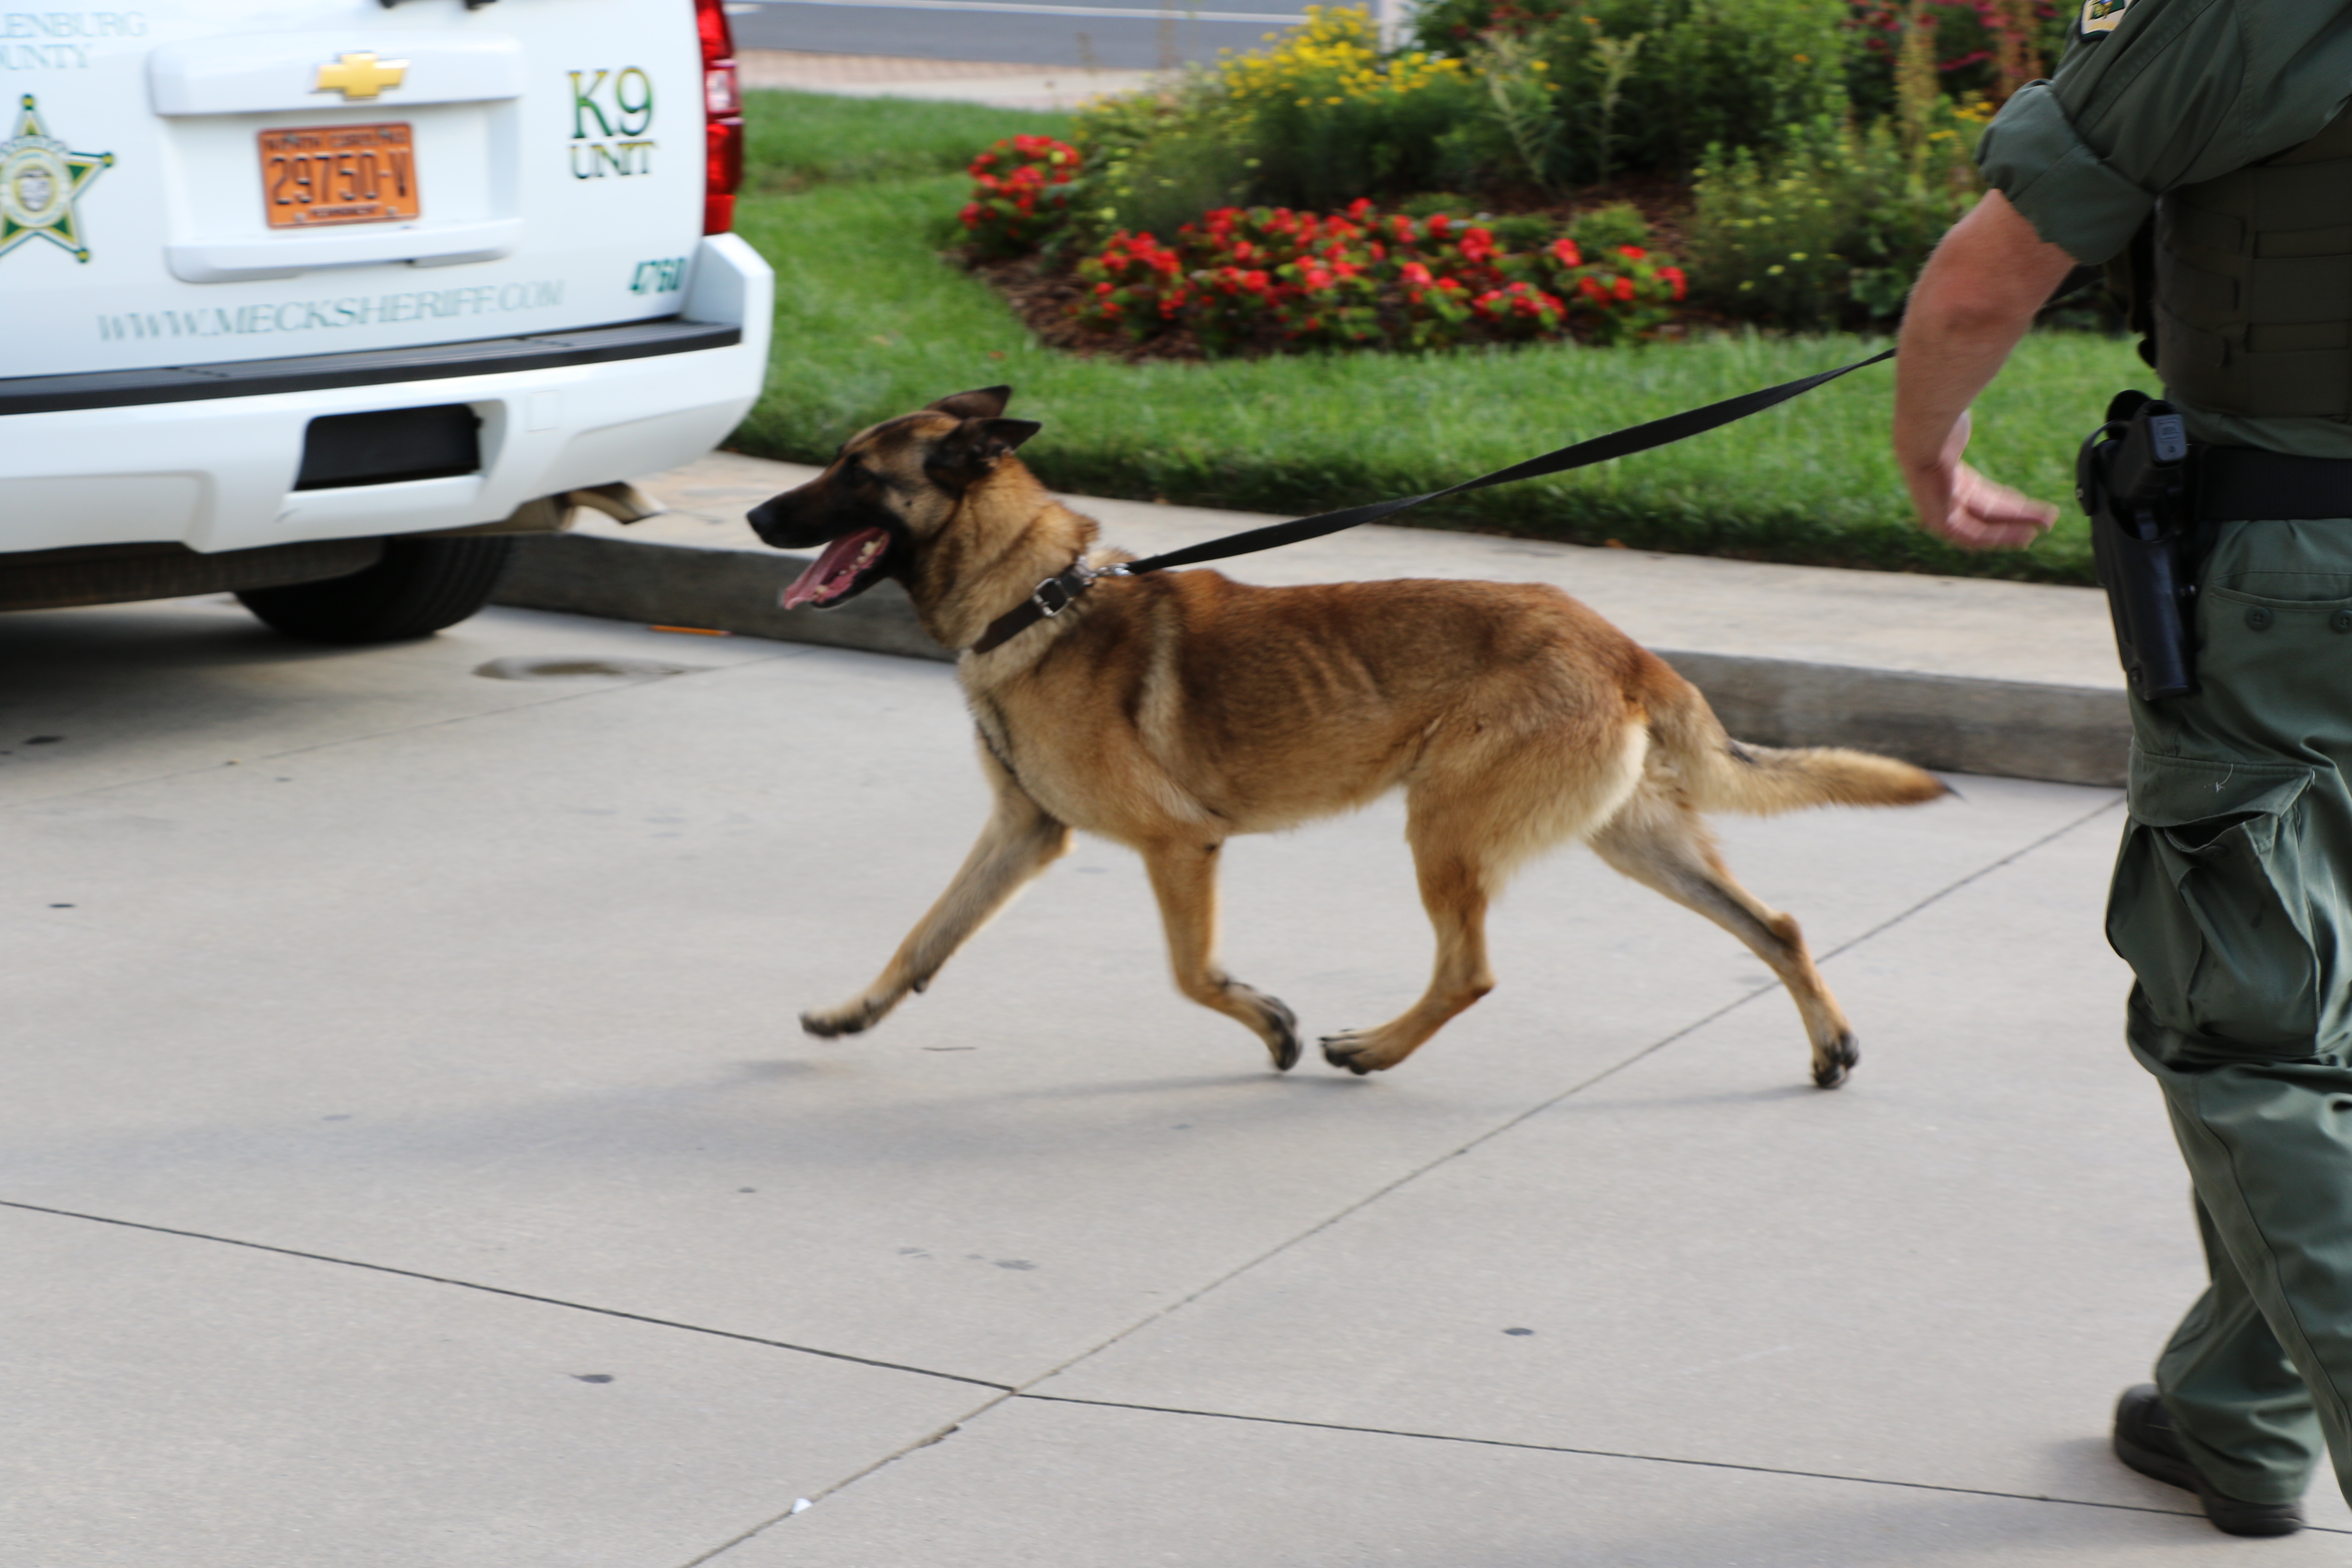 Keeping Our Community Safe, One Sniff At a Time - Mecklenburg County Blog